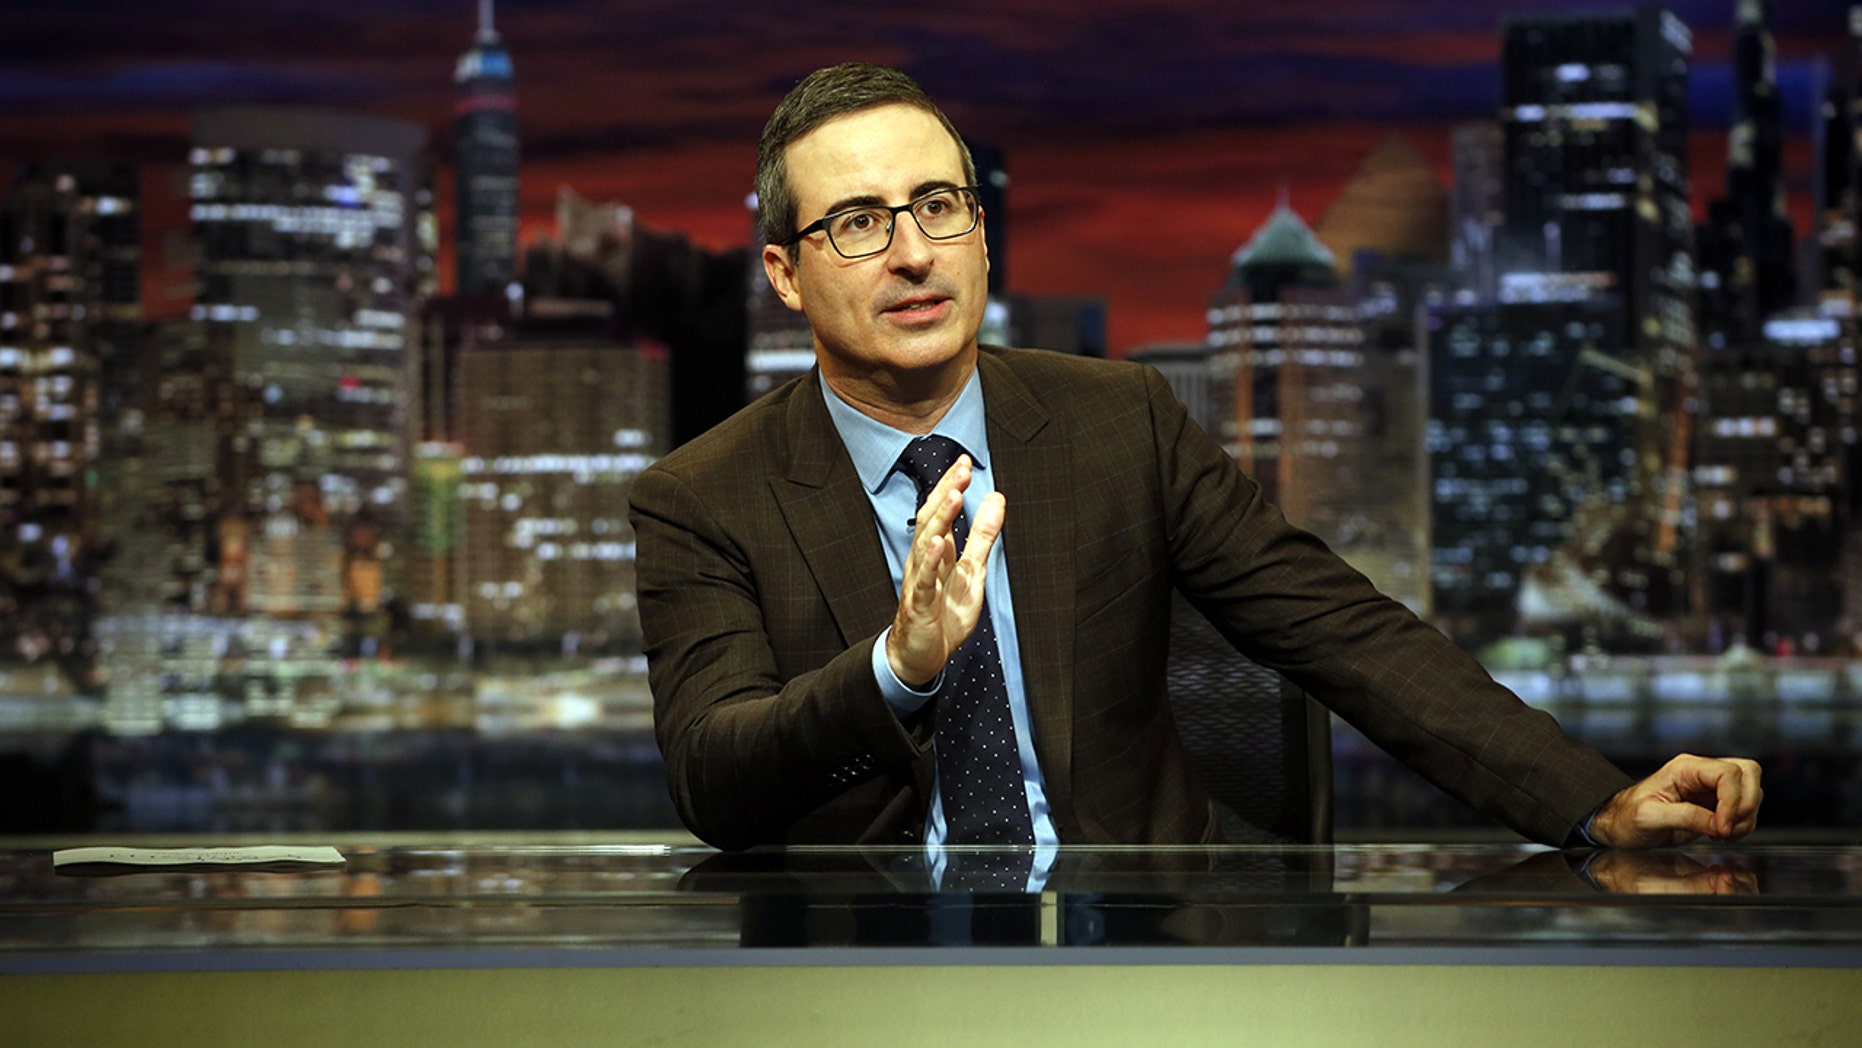 #39 Last Week Tonight with John Oliver #39 renewed by HBO for three more